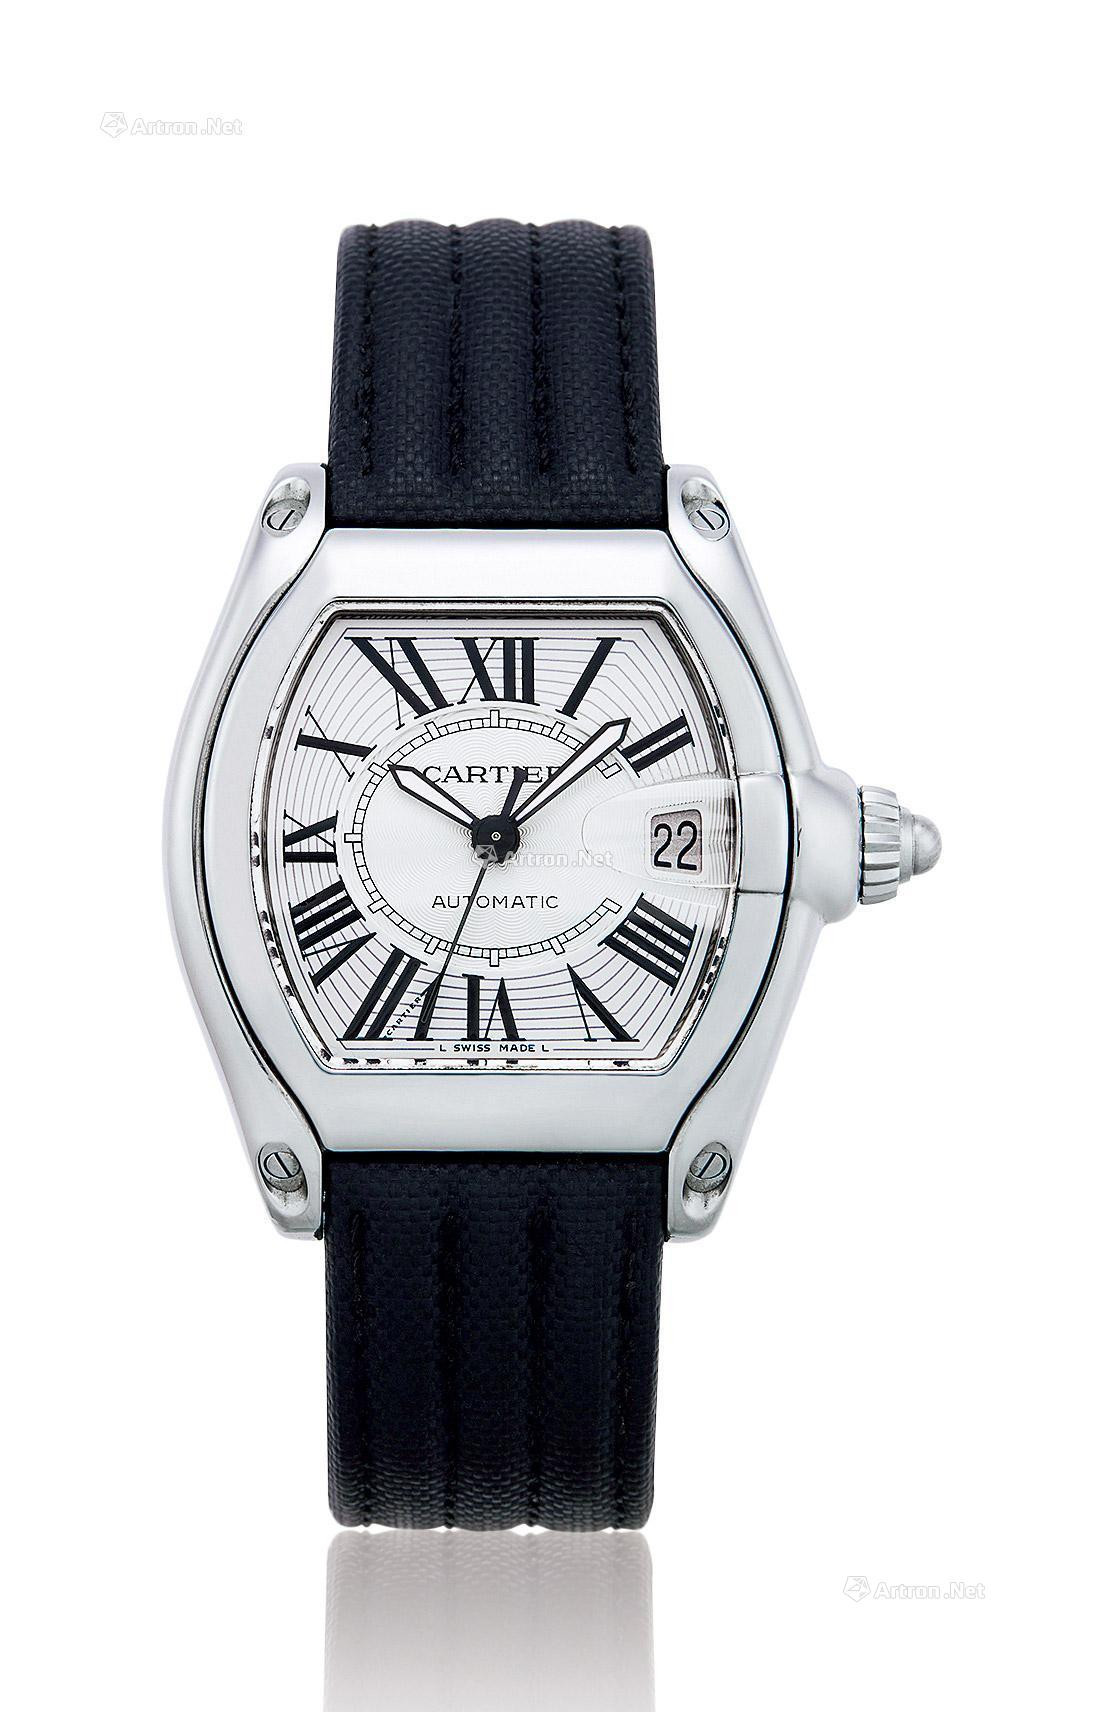 CARTIER A STAINLESS STEEL AUTOMATIC WRISTWATCH WITH DATE INDICATION